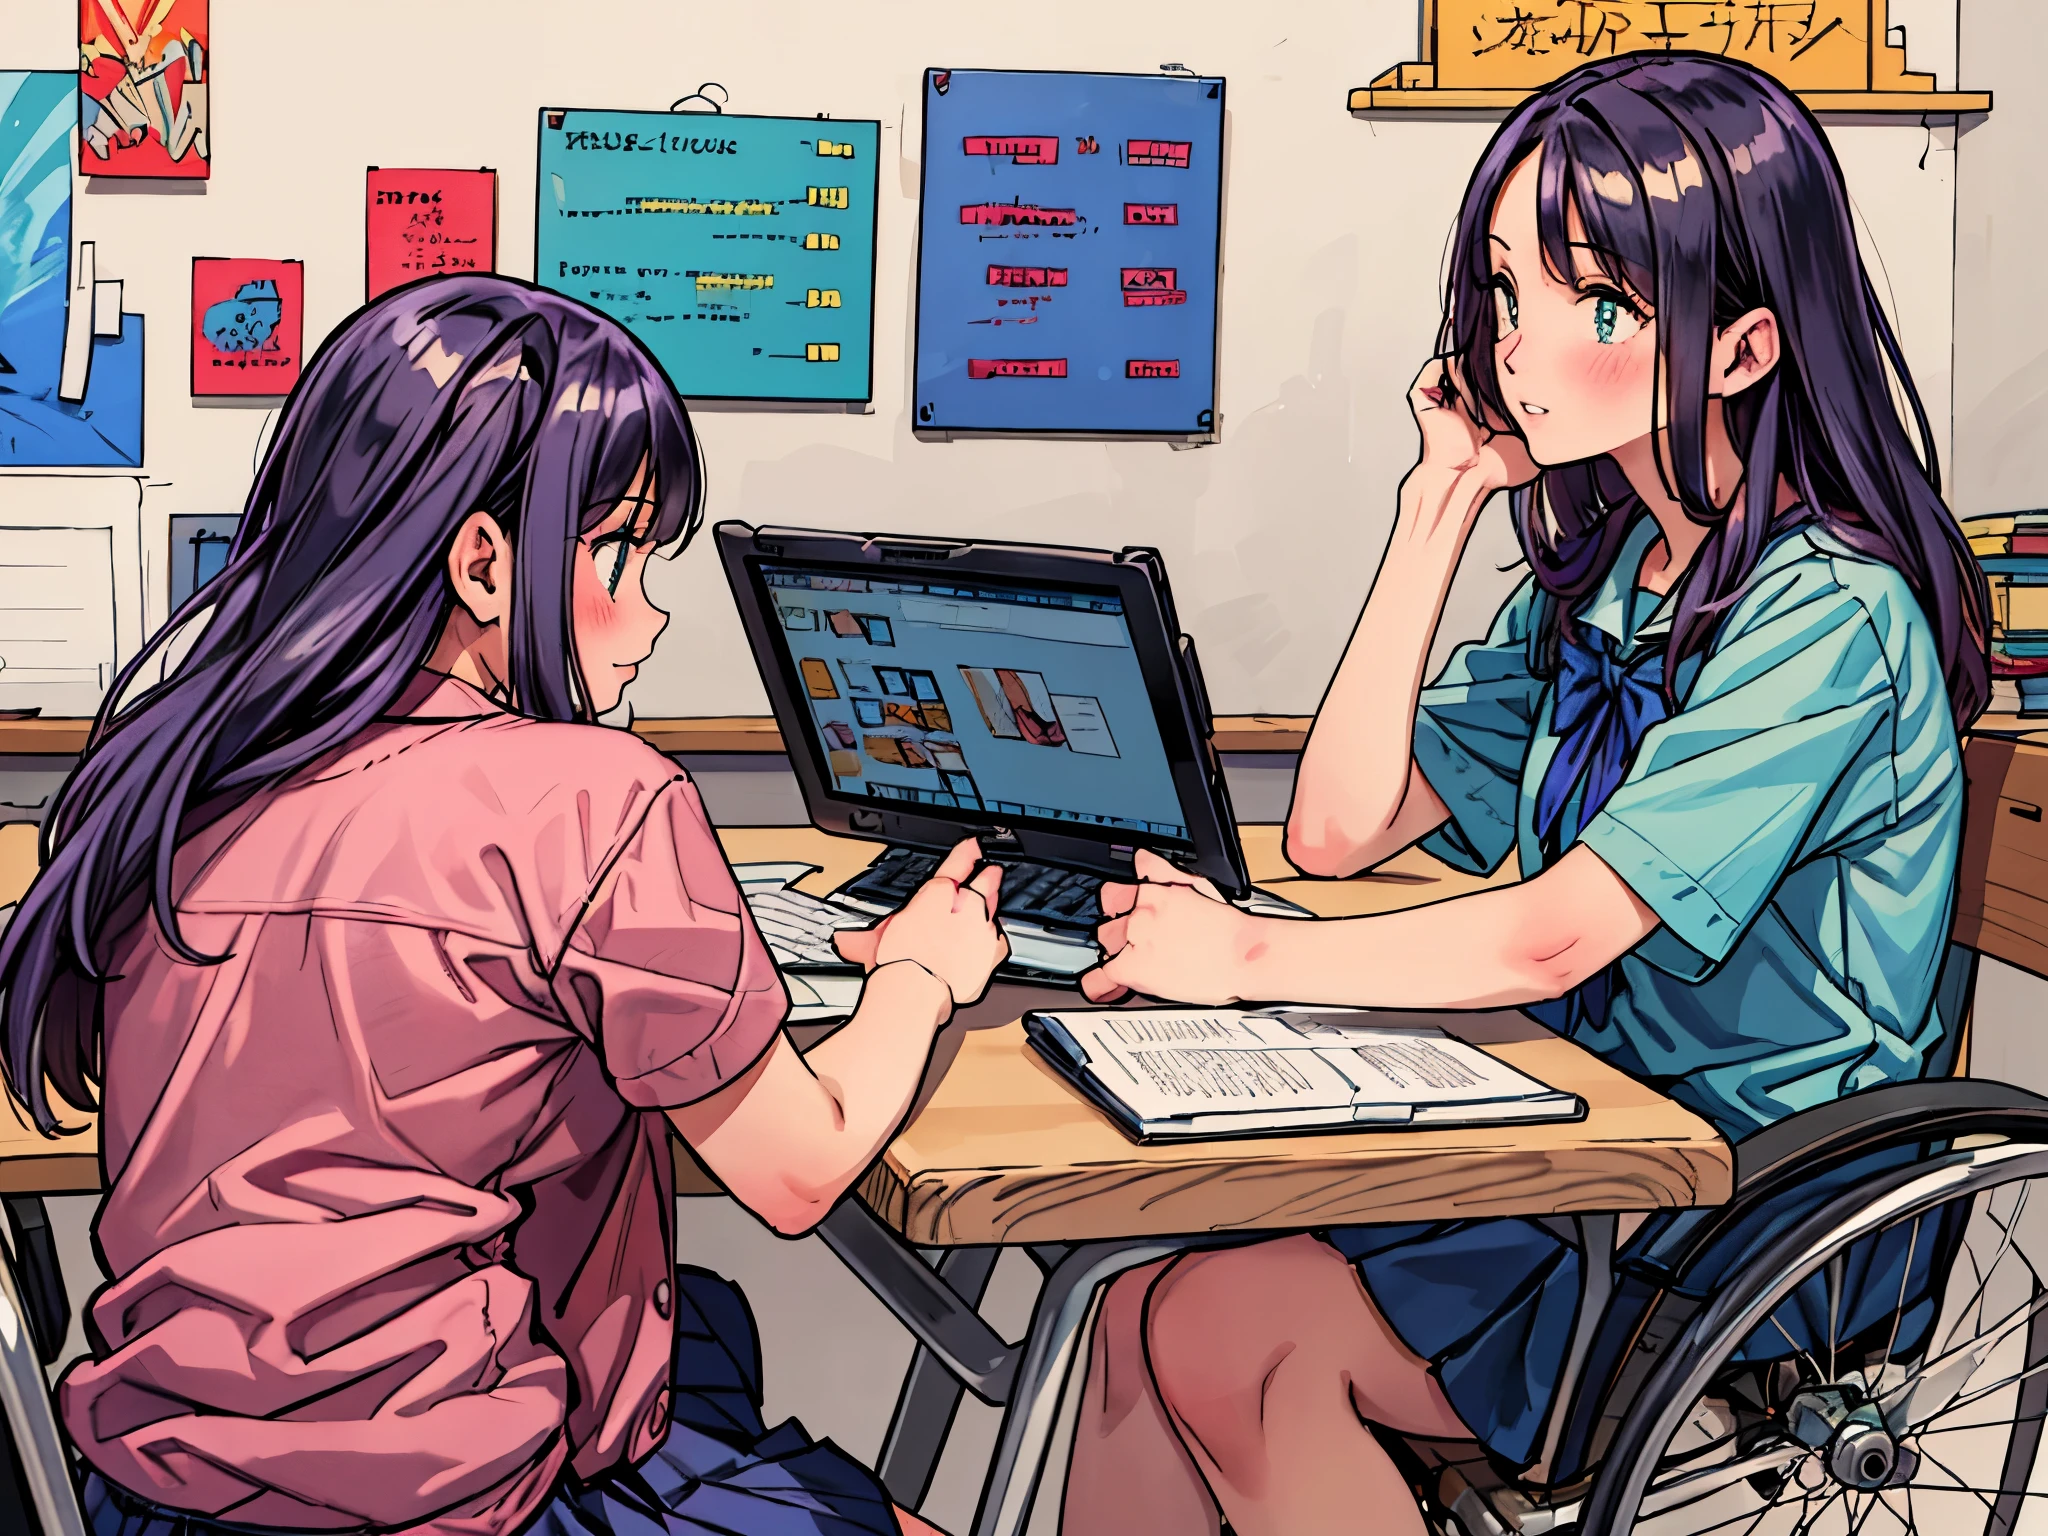 (best quality,4k,highres,ultra-detailed,realistic:1.2),inside the school,inside the classroom,two girls,shy,blush,nervous,extremely detailed eyes,faces to face,riding wheelchair,beautiful detailed eyes,beautiful detailed lips,long eyelashes,,blouse,skirt,shoes,vivid colors,portrait style,dynamic lighting,colorful scene,happy expressions,bookshelves,whiteboard,chalkboard,laptops,desk and chairs,learning materials,open windows,green plants,florescent lights